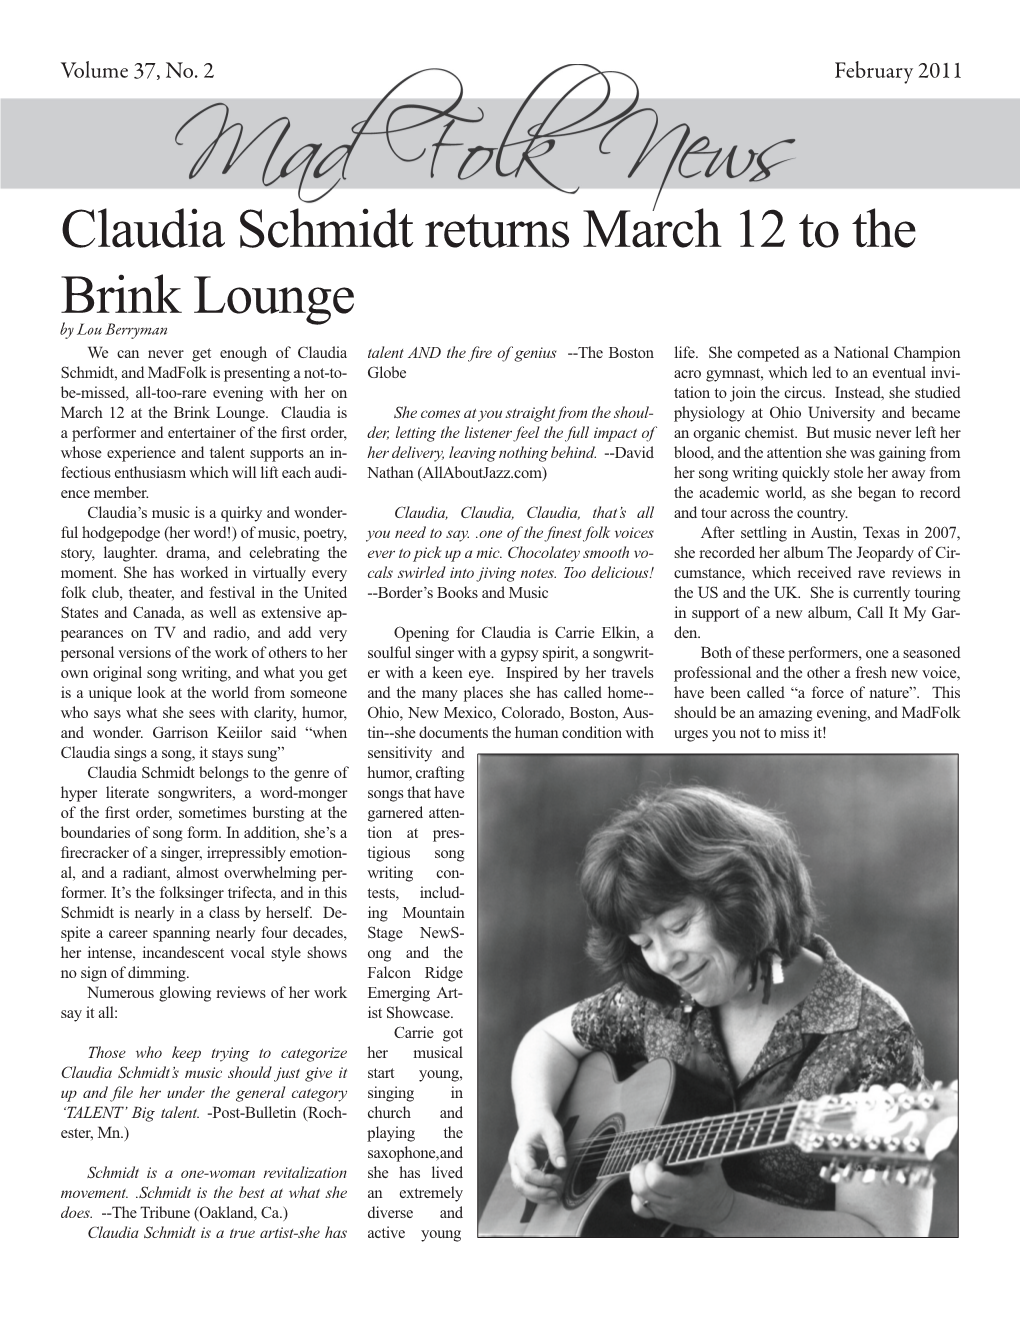 Claudia Schmidt Returns March 12 to the Brink Lounge by Lou Berryman We Can Never Get Enough of Claudia Talent and the Fire of Genius --The Boston Life